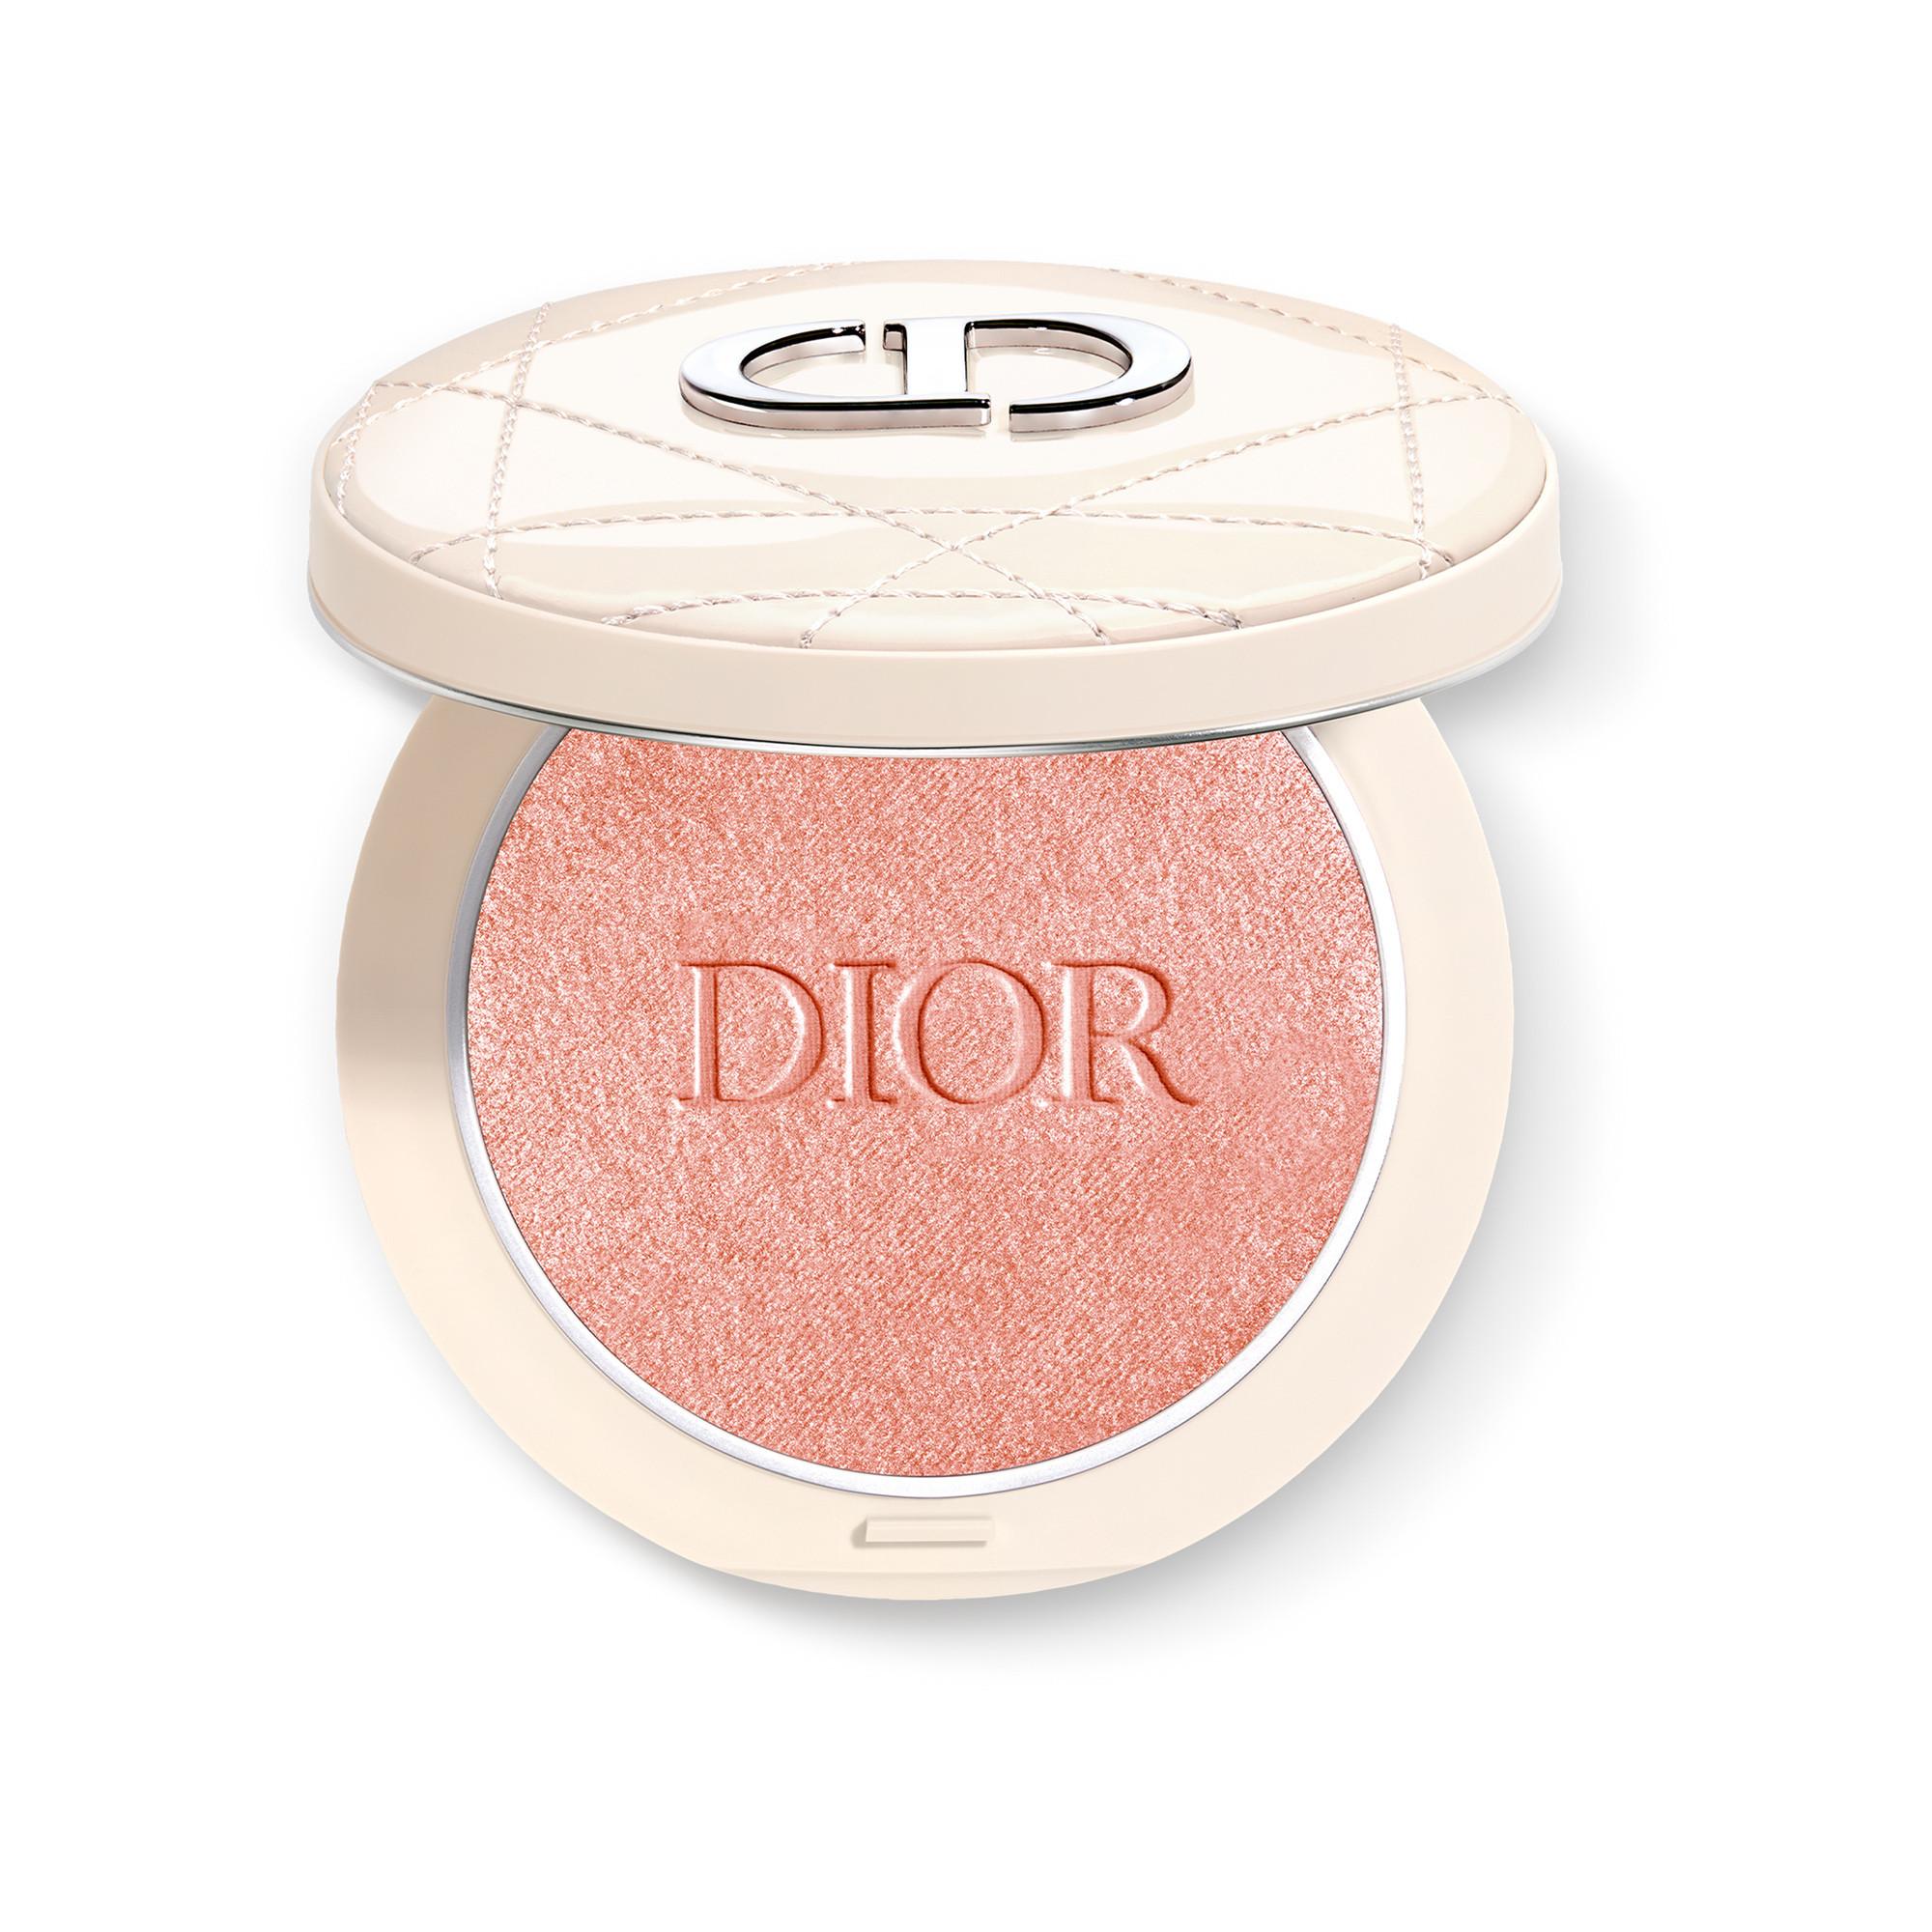 Dior Dior Forever Couture Luminizer Highlighter  Intensiver Puder-Highlighter 